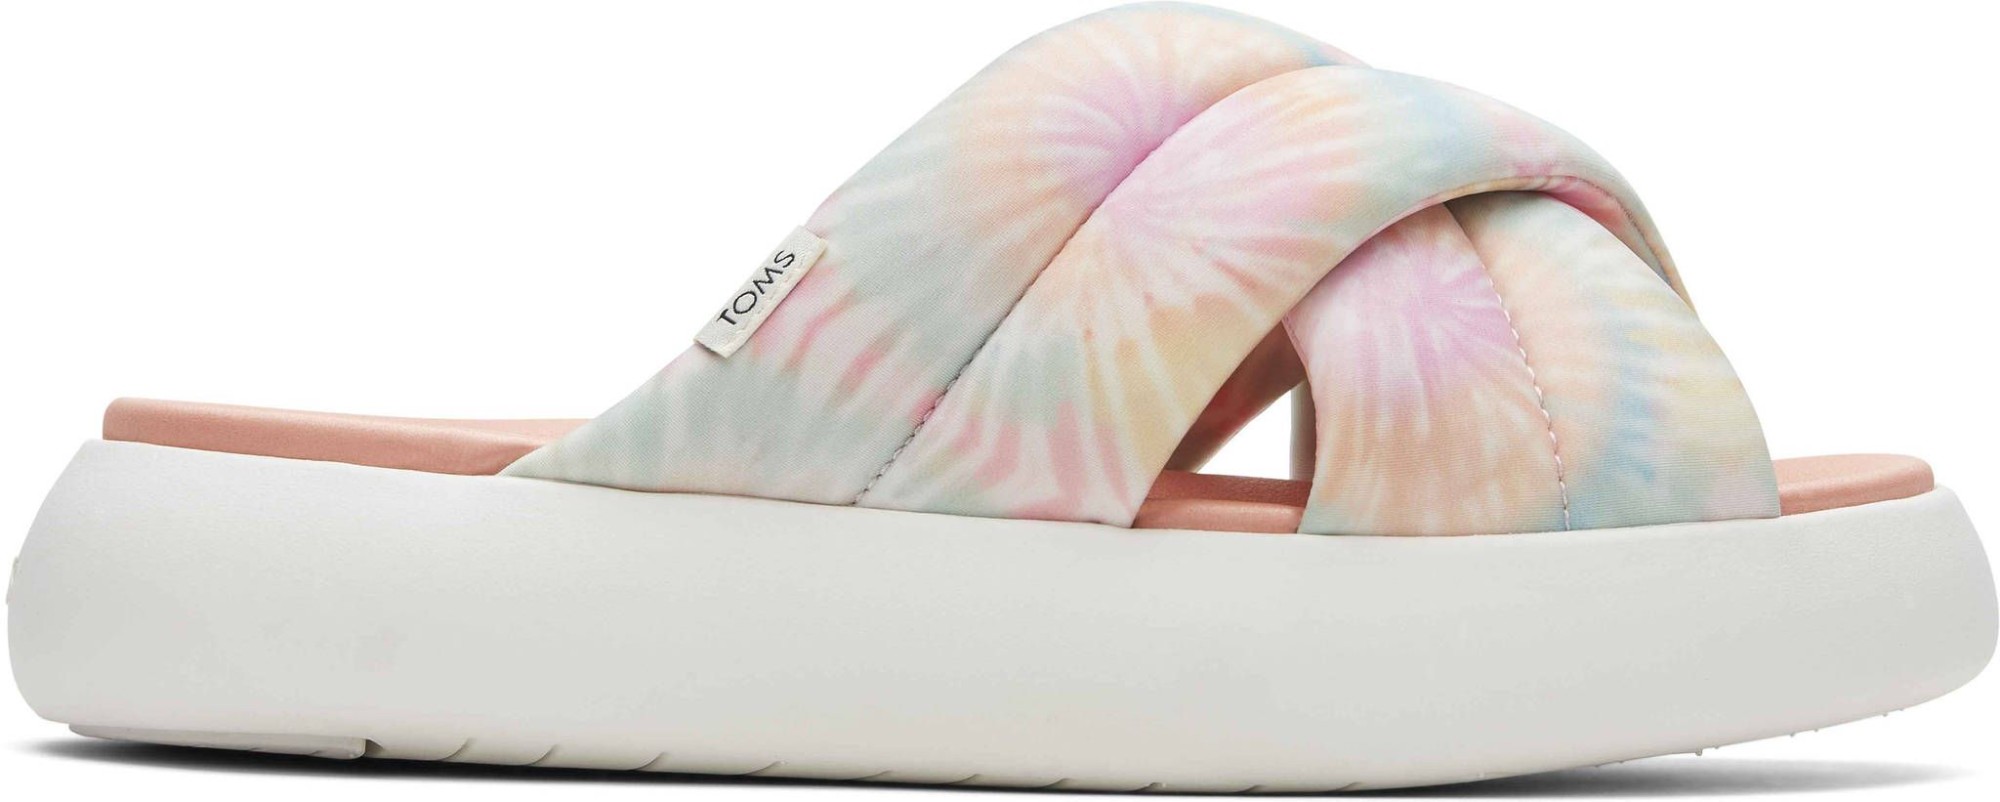 TOMS TieDye Repreve Jersey Mallow Crossover Sandal Candy Pink 41,5